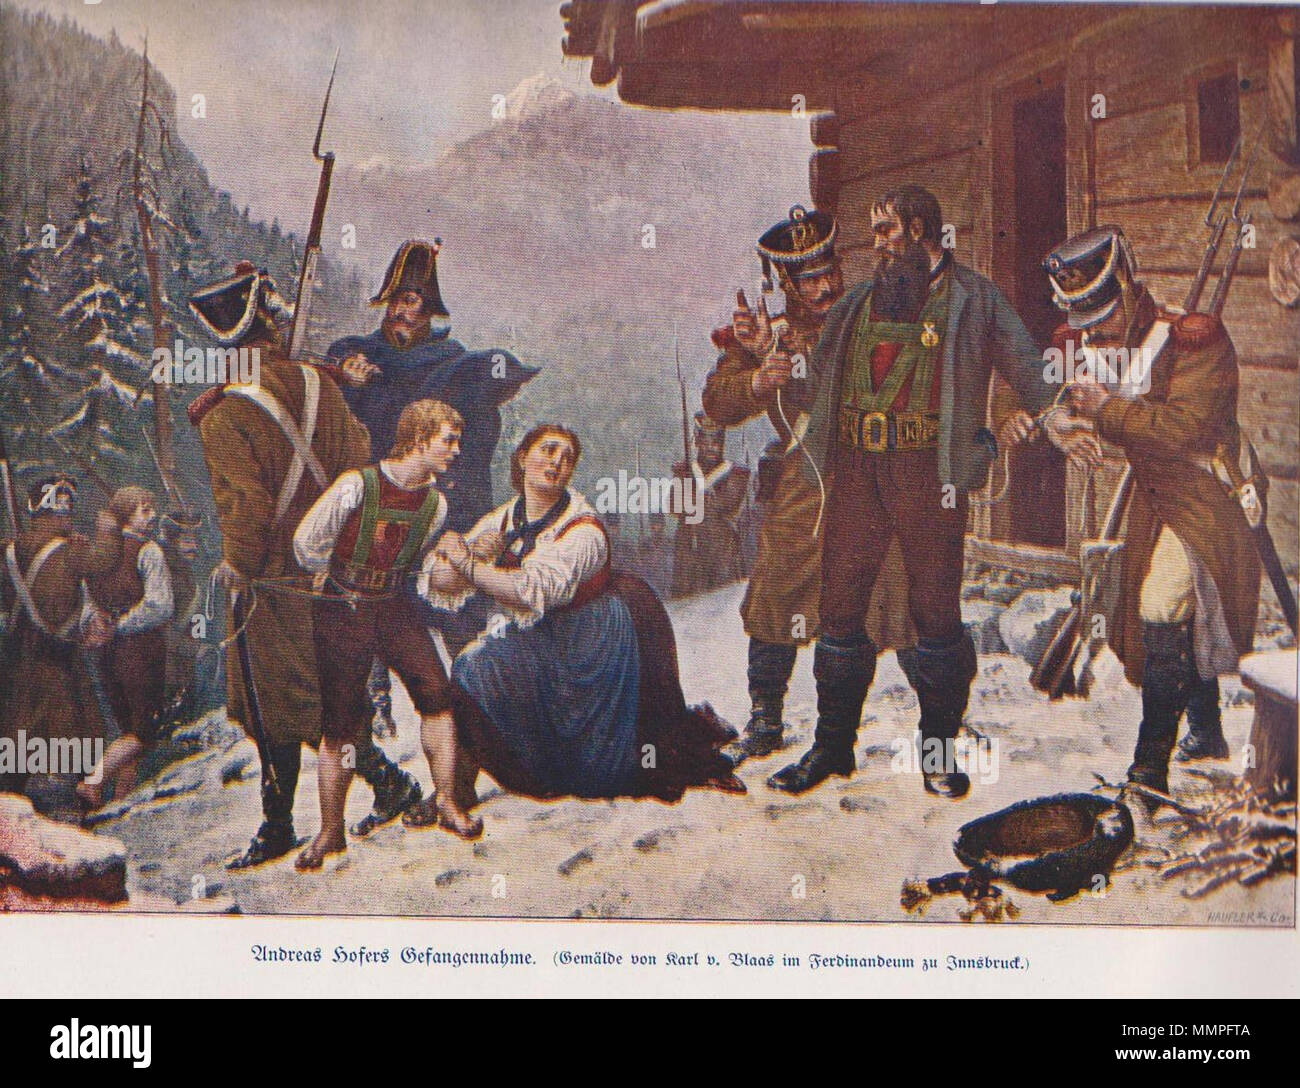 . French soldiers capturing Andreas Hofer on January 28, 1810 on a Tyrolean alpine hut called Mähderhütte, located on the Pfandleralm opposite St. Martin in Passeier.  . 31 December 1890.   Karl von Blaas  (1815–1894)     Description Austrian painter, autobiographer and mosaicist  Date of birth/death 28 April 1815 19 March 1894  Location of birth/death Nauders Vienna  Authority control  : Q265340 VIAF:?25403968 ISNI:?0000 0000 6675 9010 ULAN:?500003906 LCCN:?nr88000025 GND:?119038560 WorldCat Andreas Hofers Gefangennahme (Karl v Blaas) Stock Photo